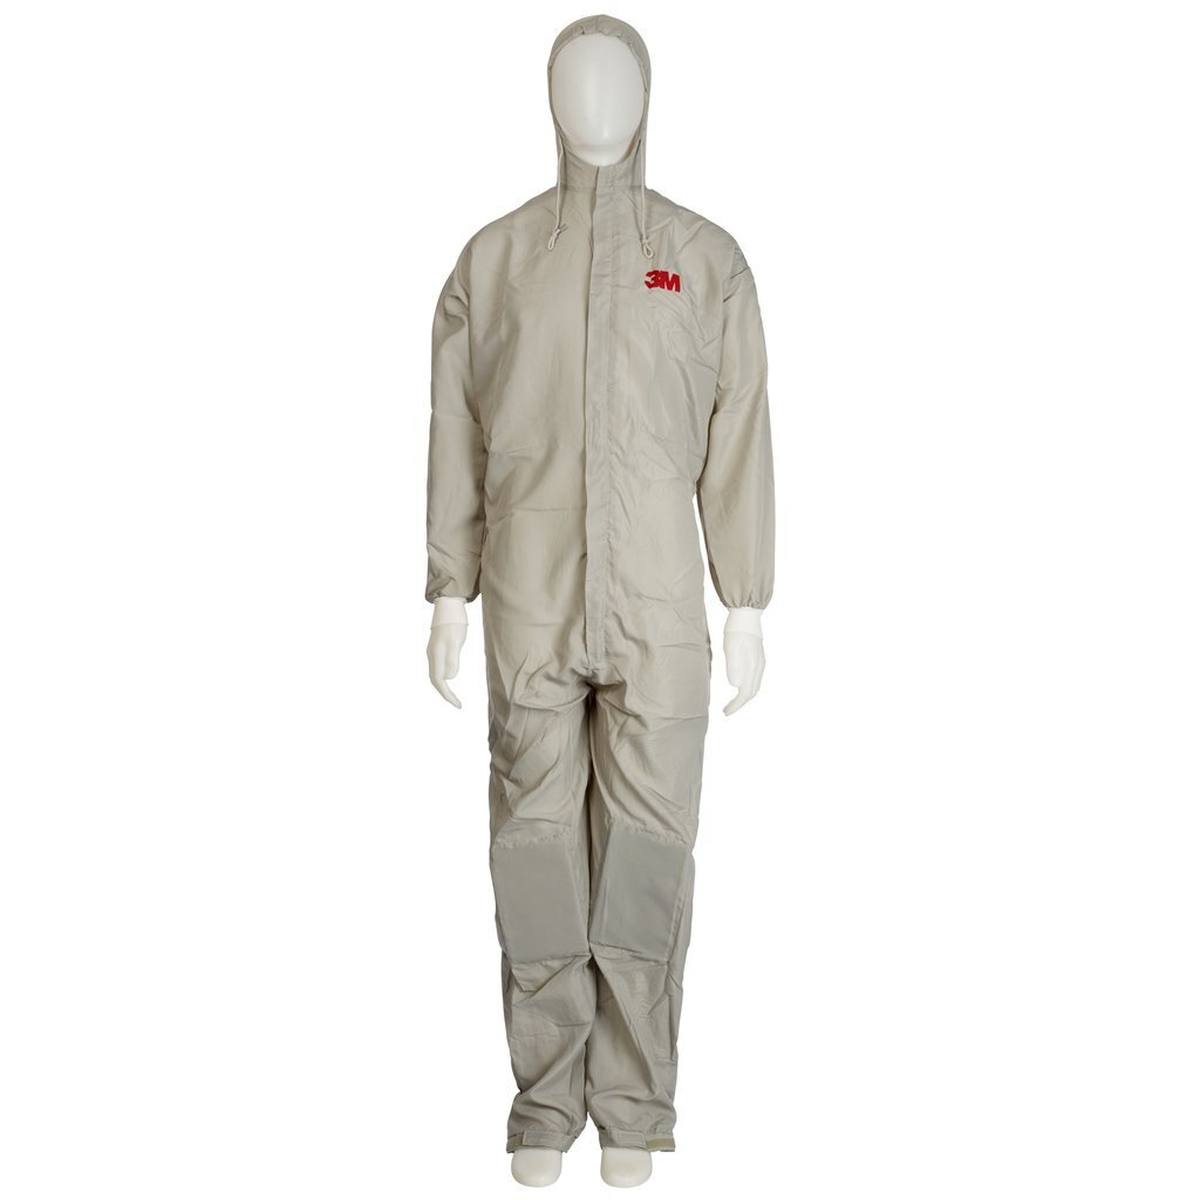 3M 50425 Protective coverall, size XL, breathable, knee pads, trouser pockets, material lightweight polyester fabric, side trouser pockets, openings in the back for heat dissipation